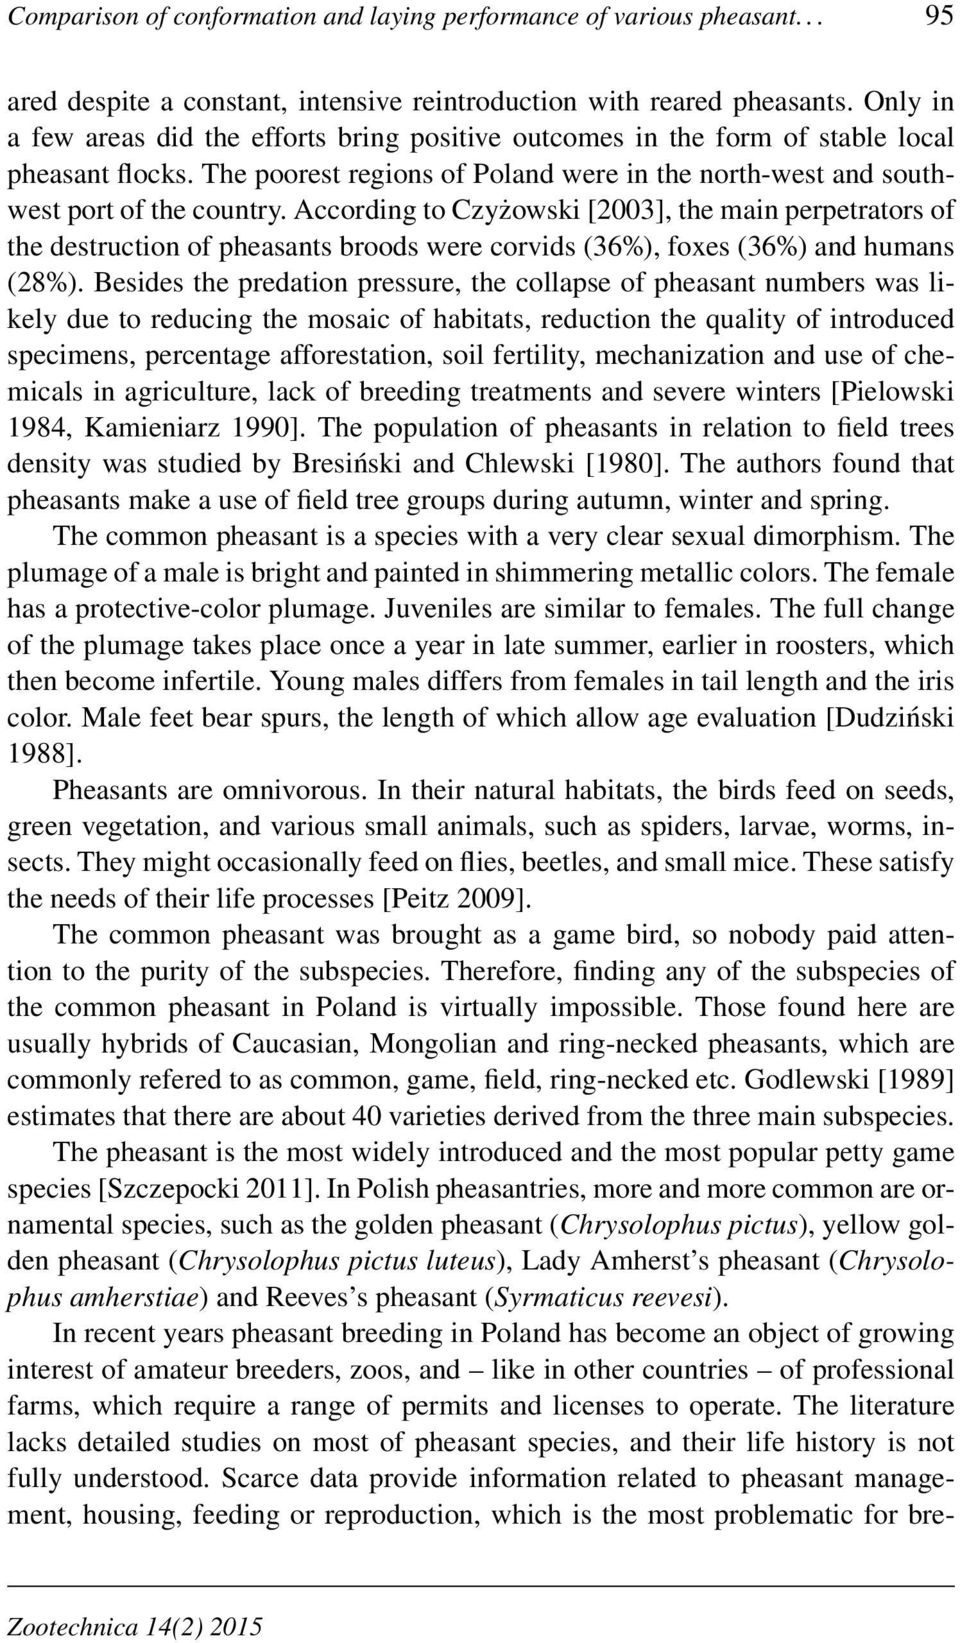 According to Czyżowski [2003], the main perpetrators of the destruction of pheasants broods were corvids (36%), foxes (36%) and humans (28%).